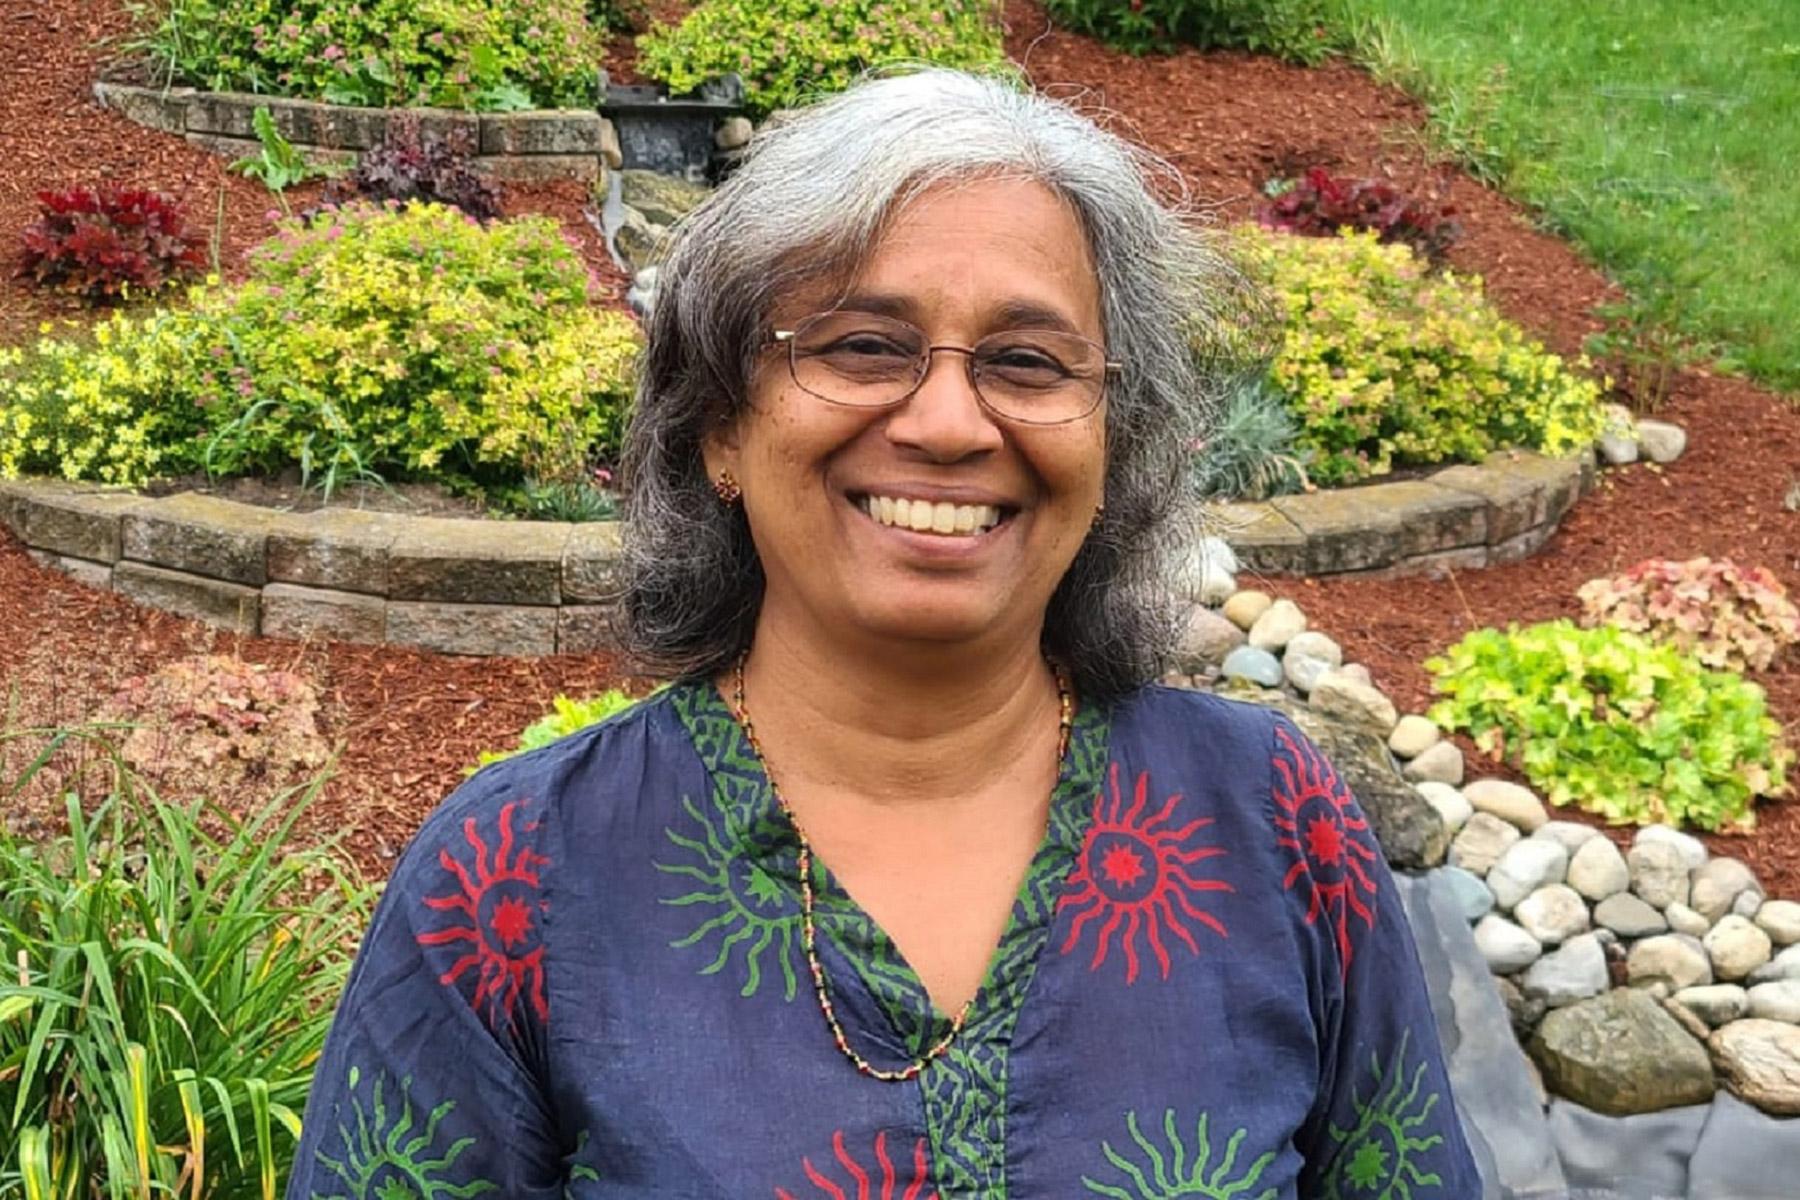 Mary Philip is Associate Professor for Lutheran Global Theology and Mission at the Martin Luther University College, Canada. One of her areas of expertise is Environmental Theology and Ecojustice. Photo: Mary Philip